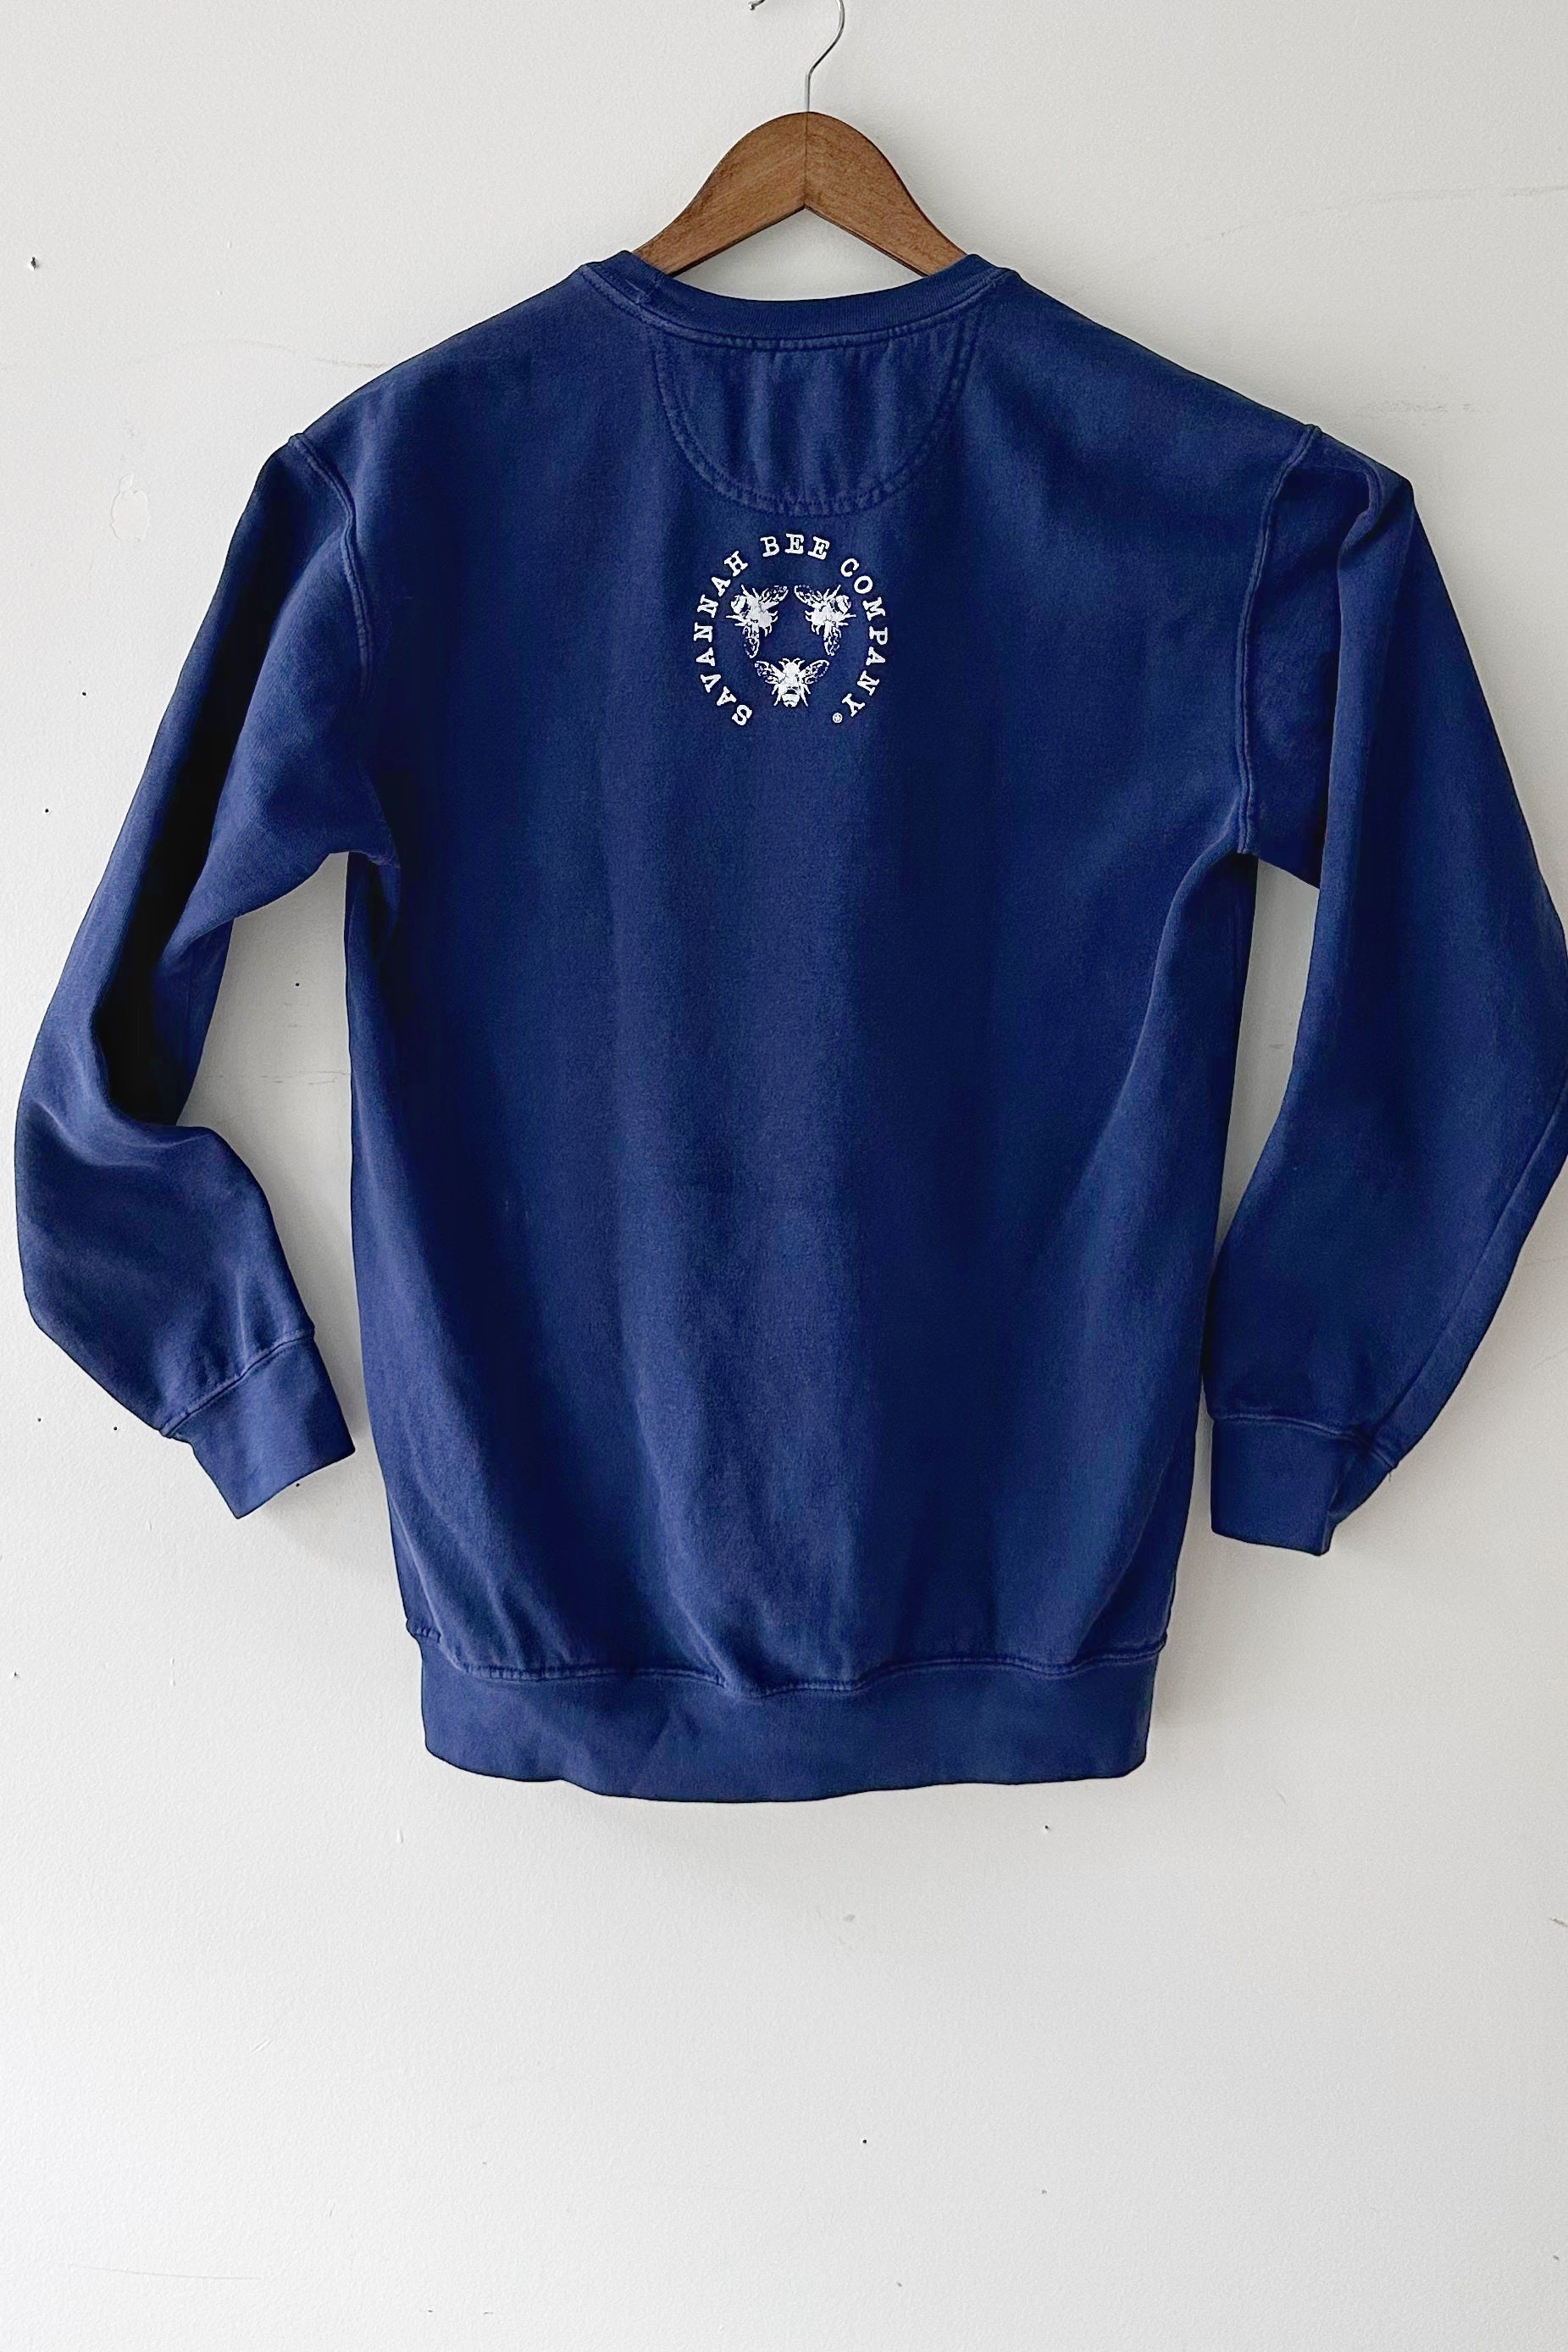 Navy blue varsity sweatshirt from behind with the Savannah Bee Company logo hanging against a white background.